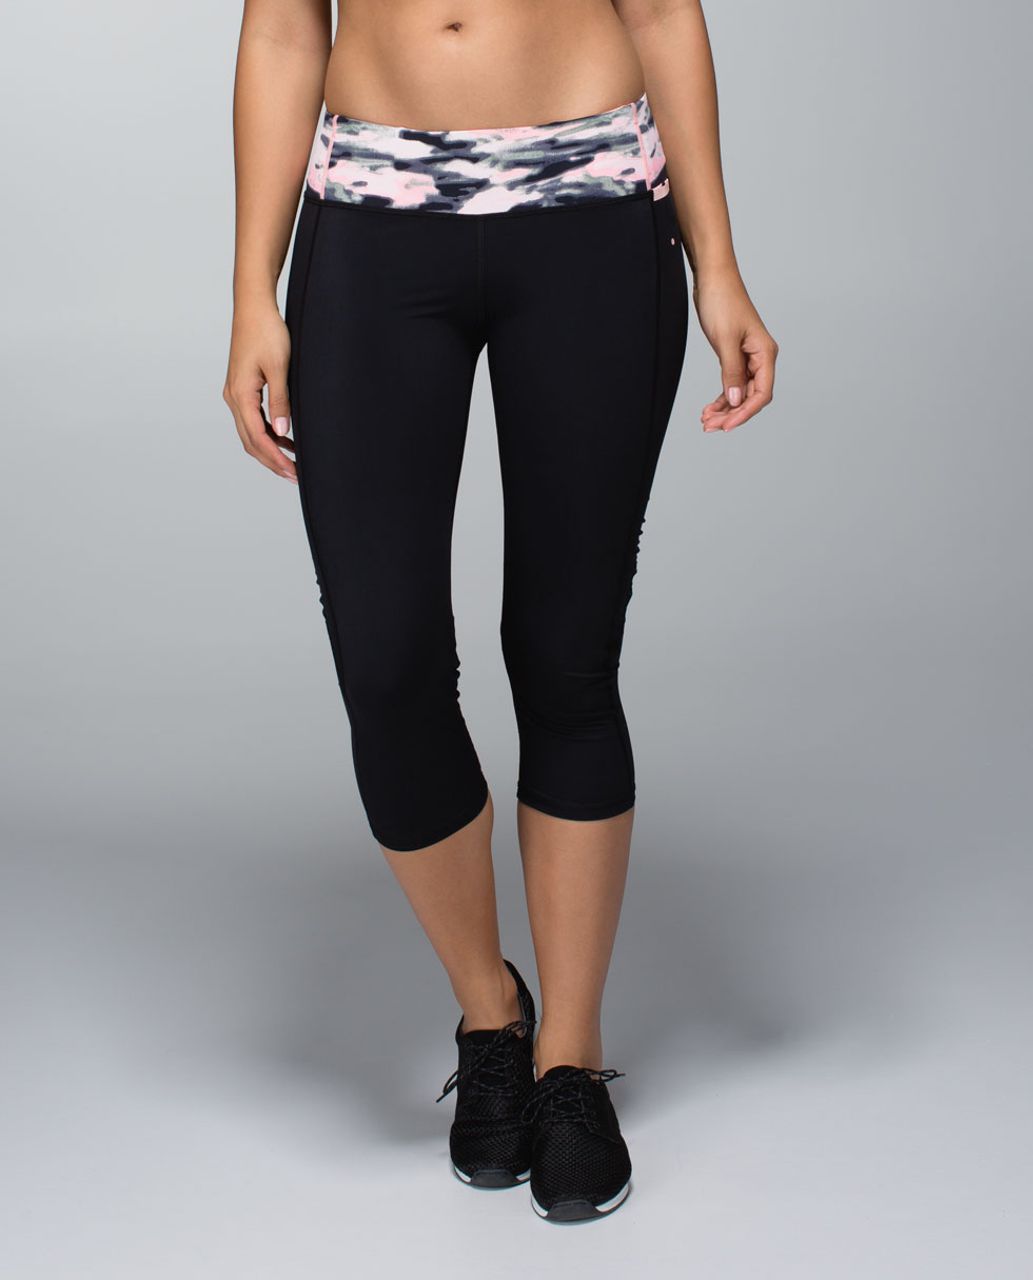 Lululemon Water Bound Crop - Black / Wamo Camo Barely Pink / Bleached Coral